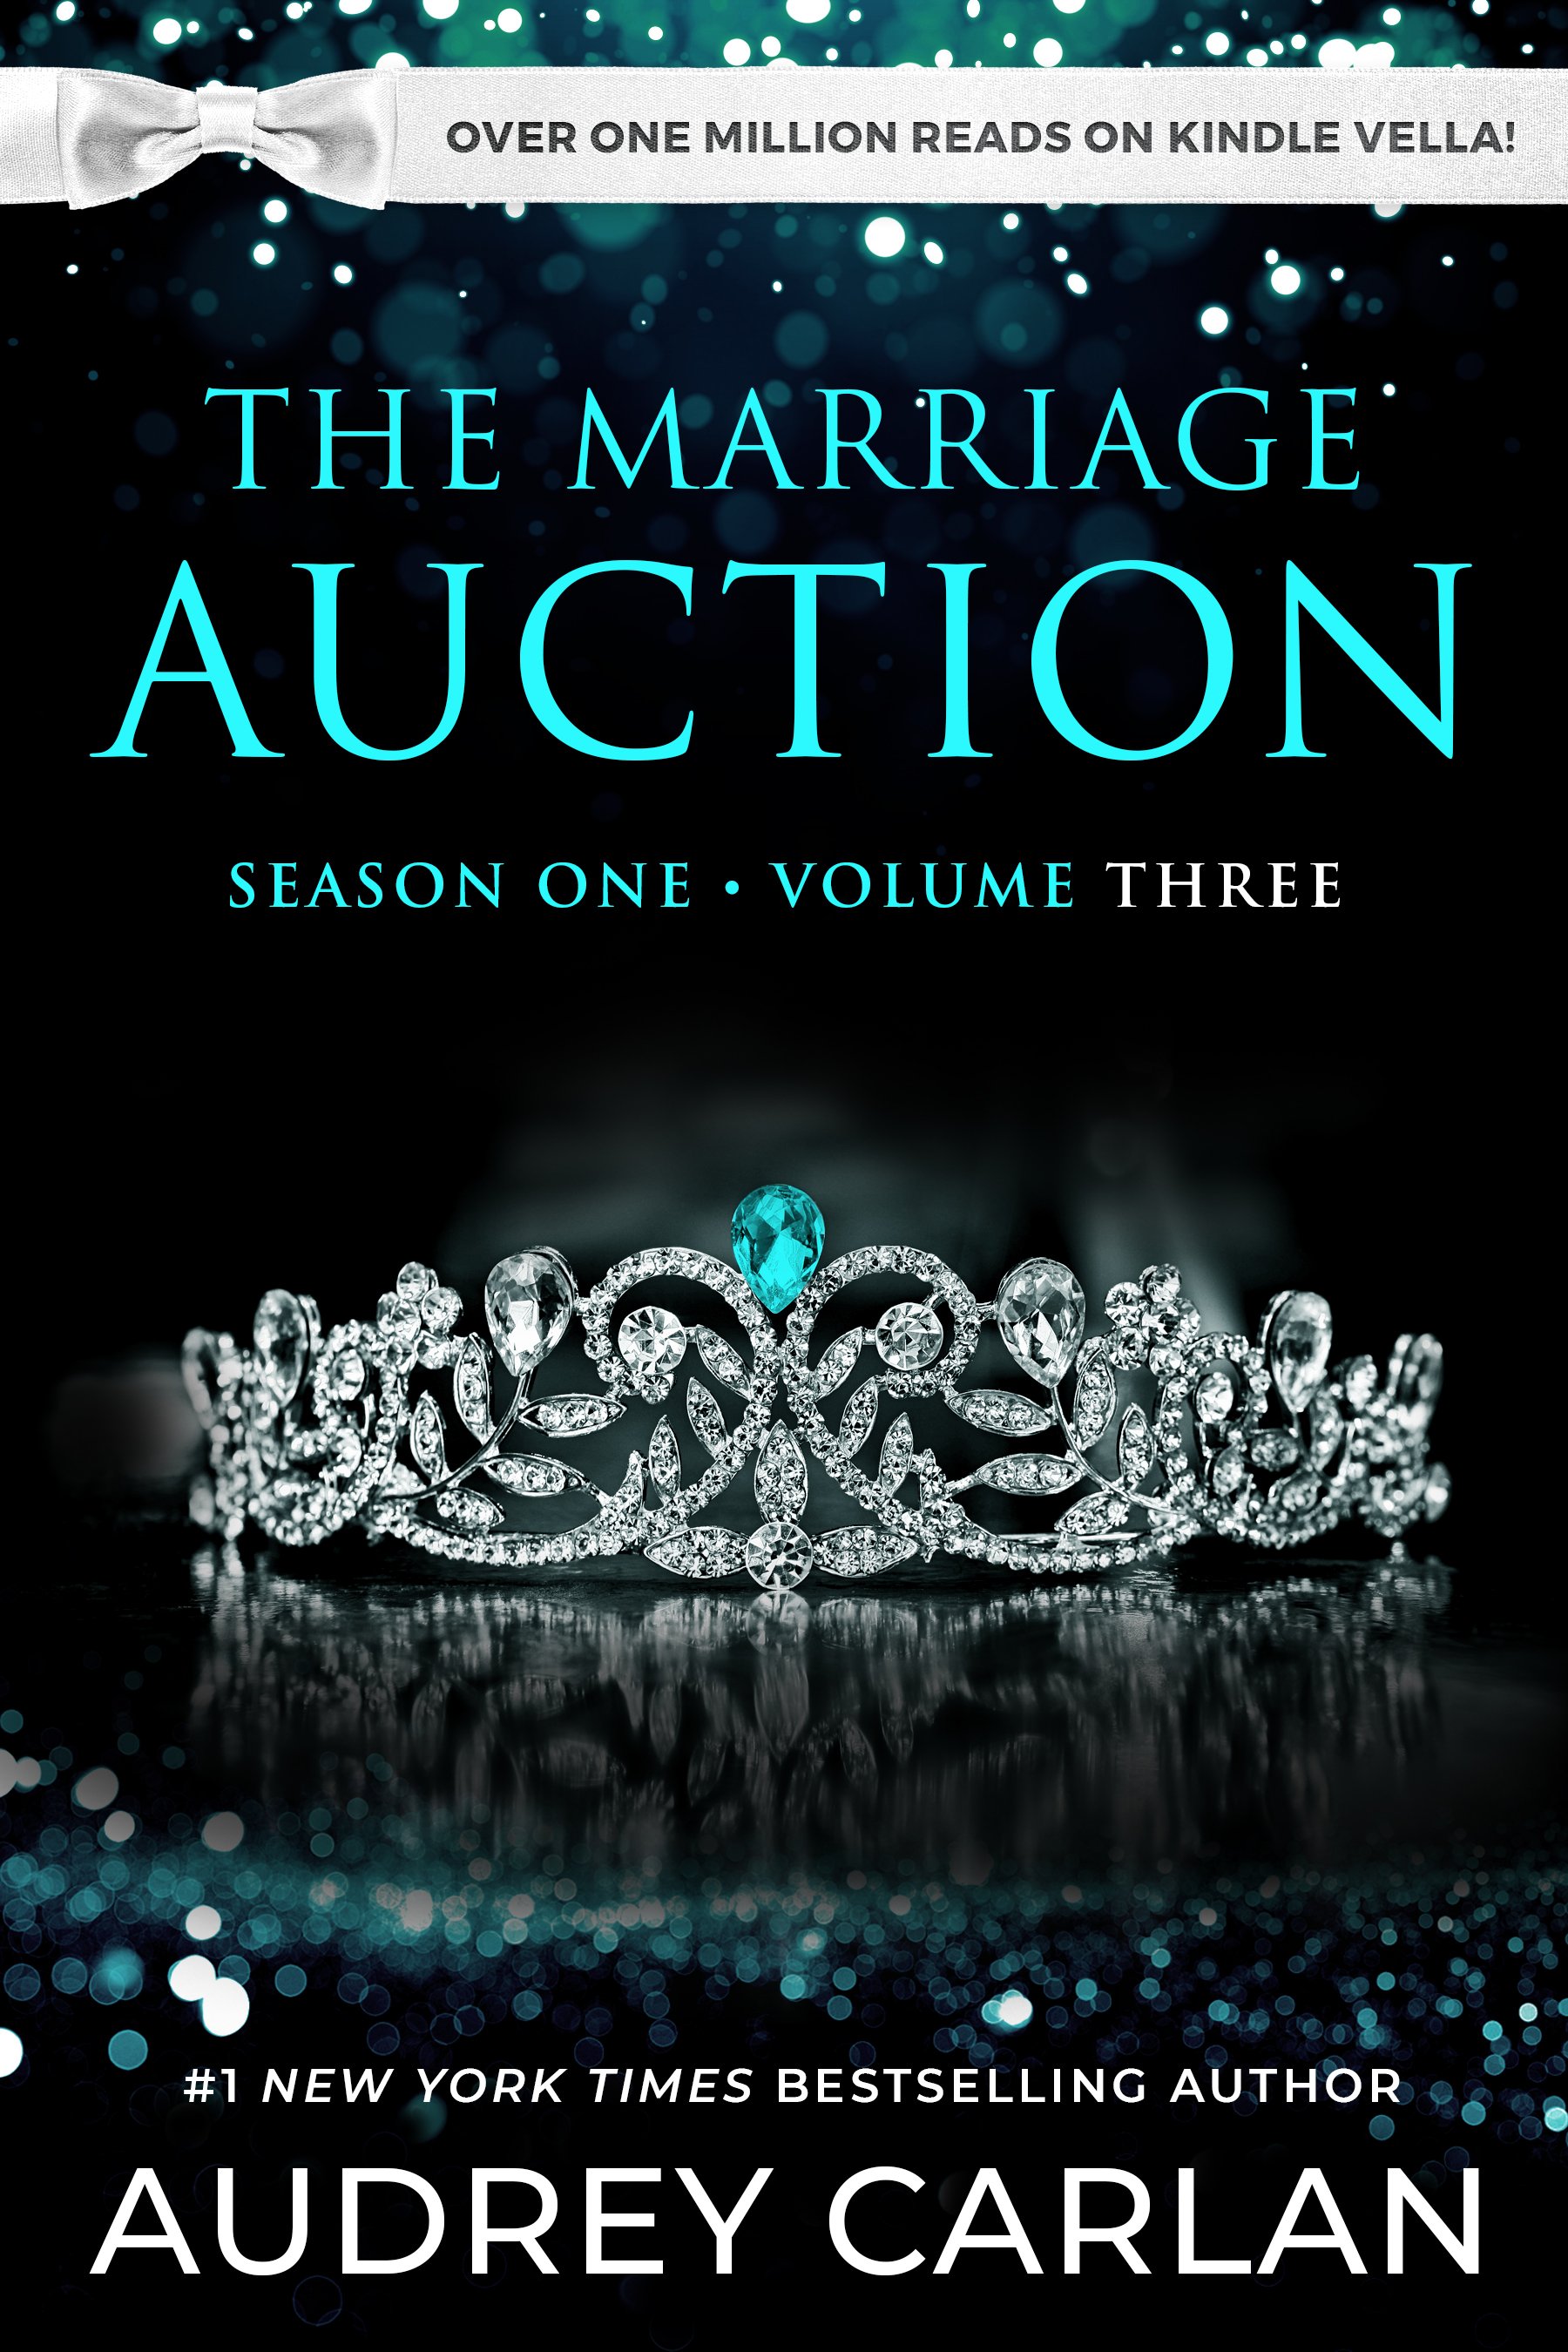 The Marriage Auction_book 3_300dpi.jpg